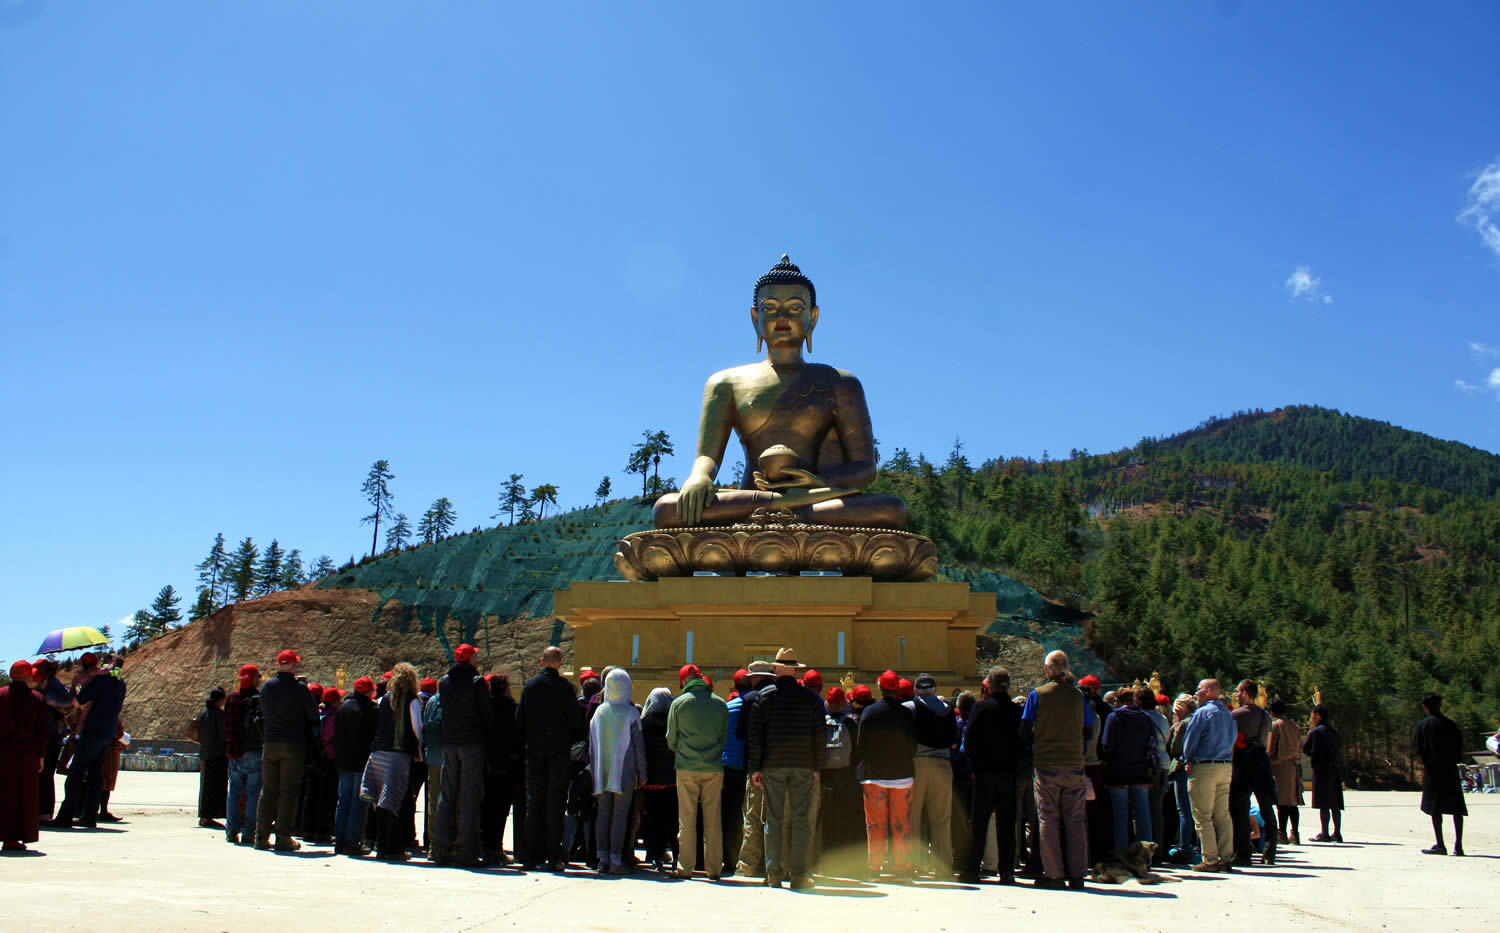 Group members admiring the 169 foot tall Buddha Dodenma.